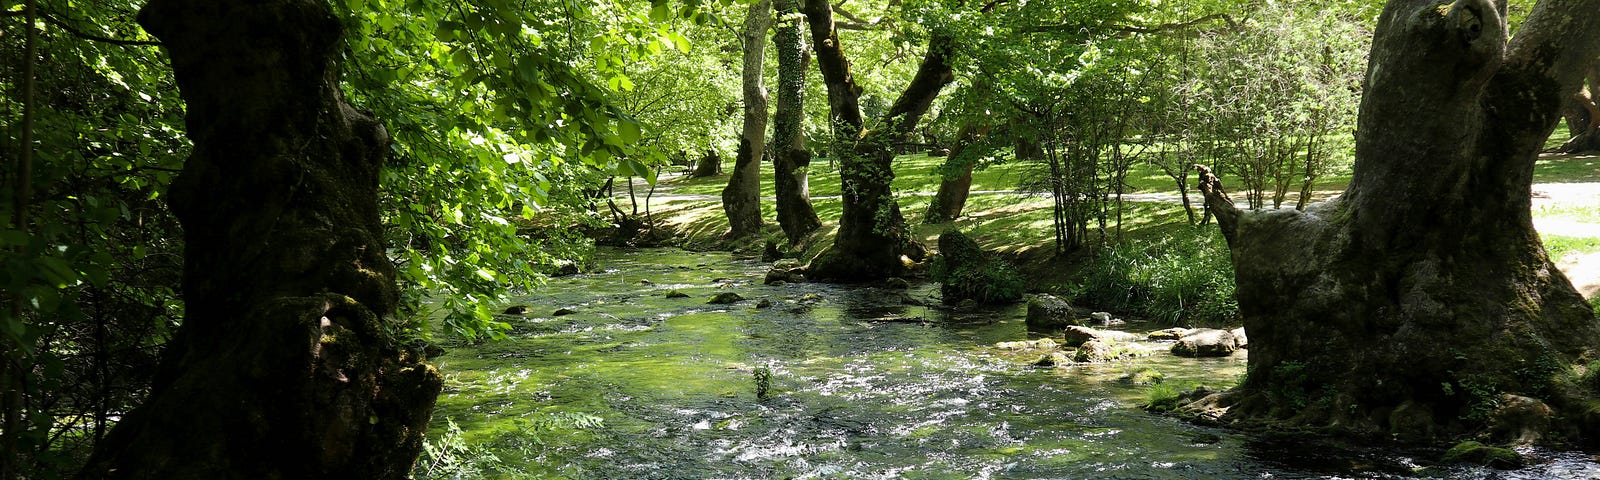 A river surrounded by green trees stretching over the water.